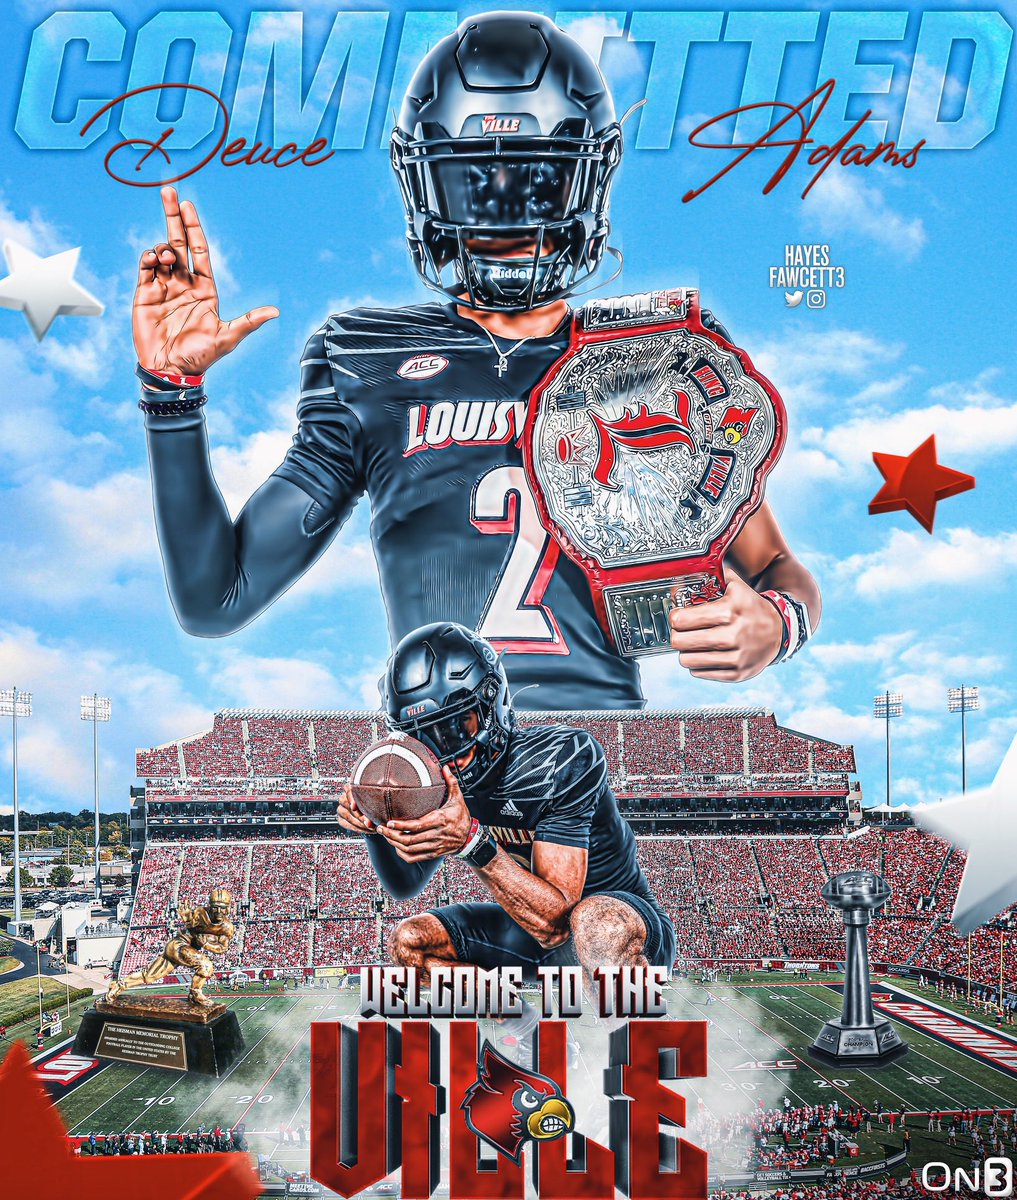 I’m Home. COMMITTED⚫️🔴 @Hayesfawcett3